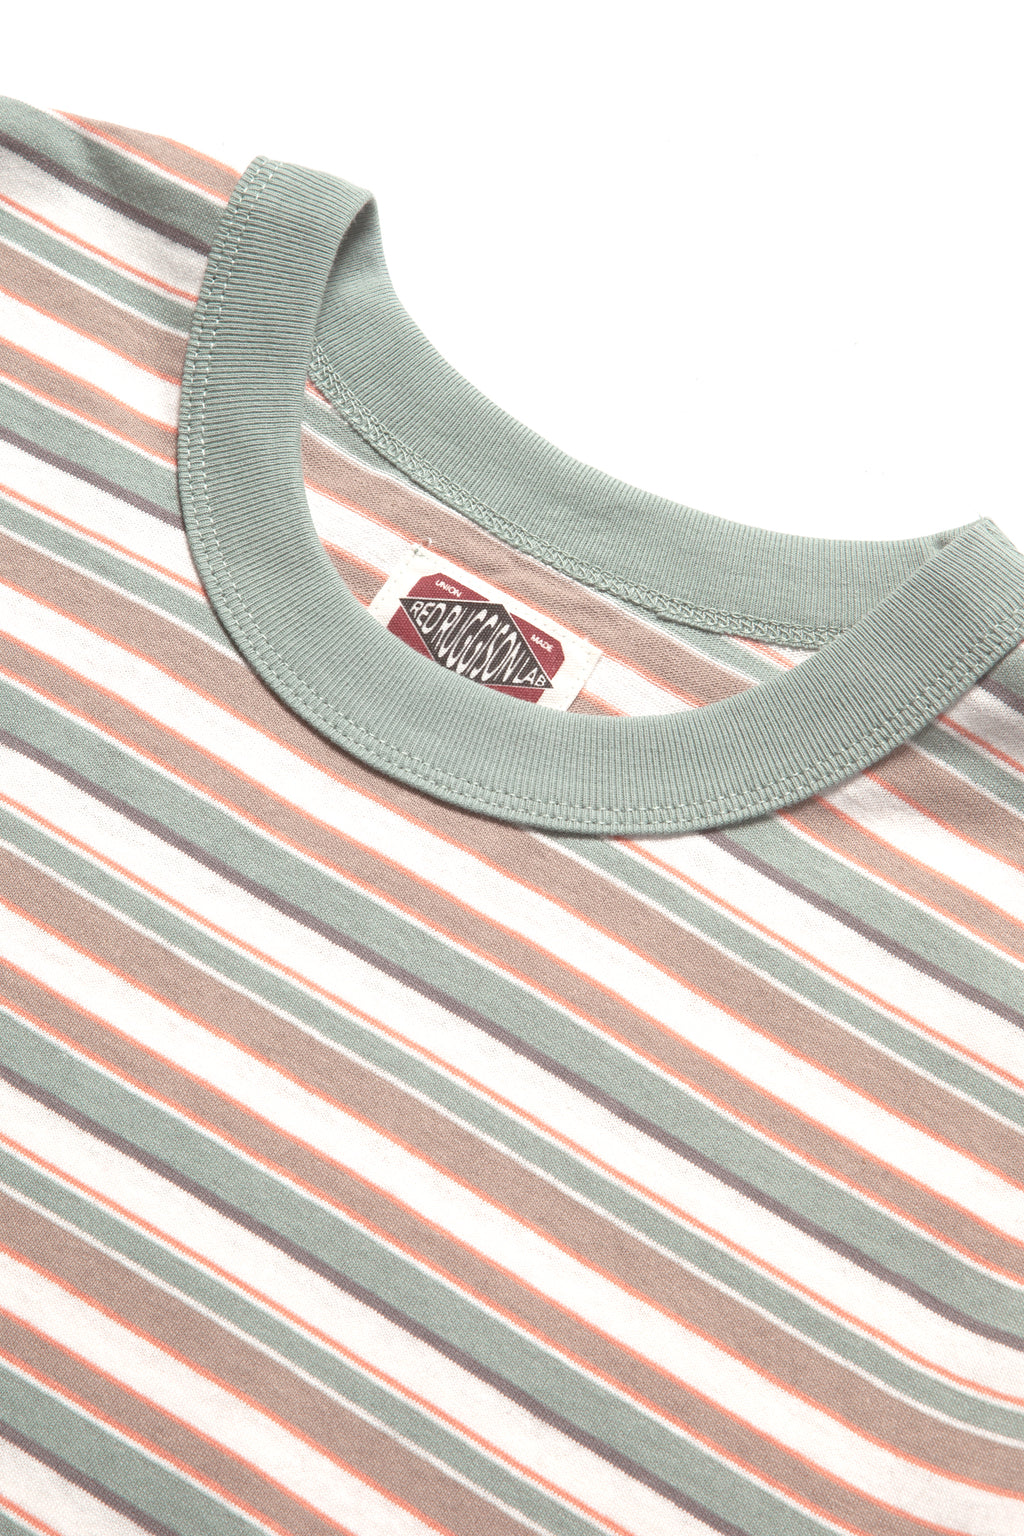 Red Ruggison - 90's Striped T-Shirt - White/Mint